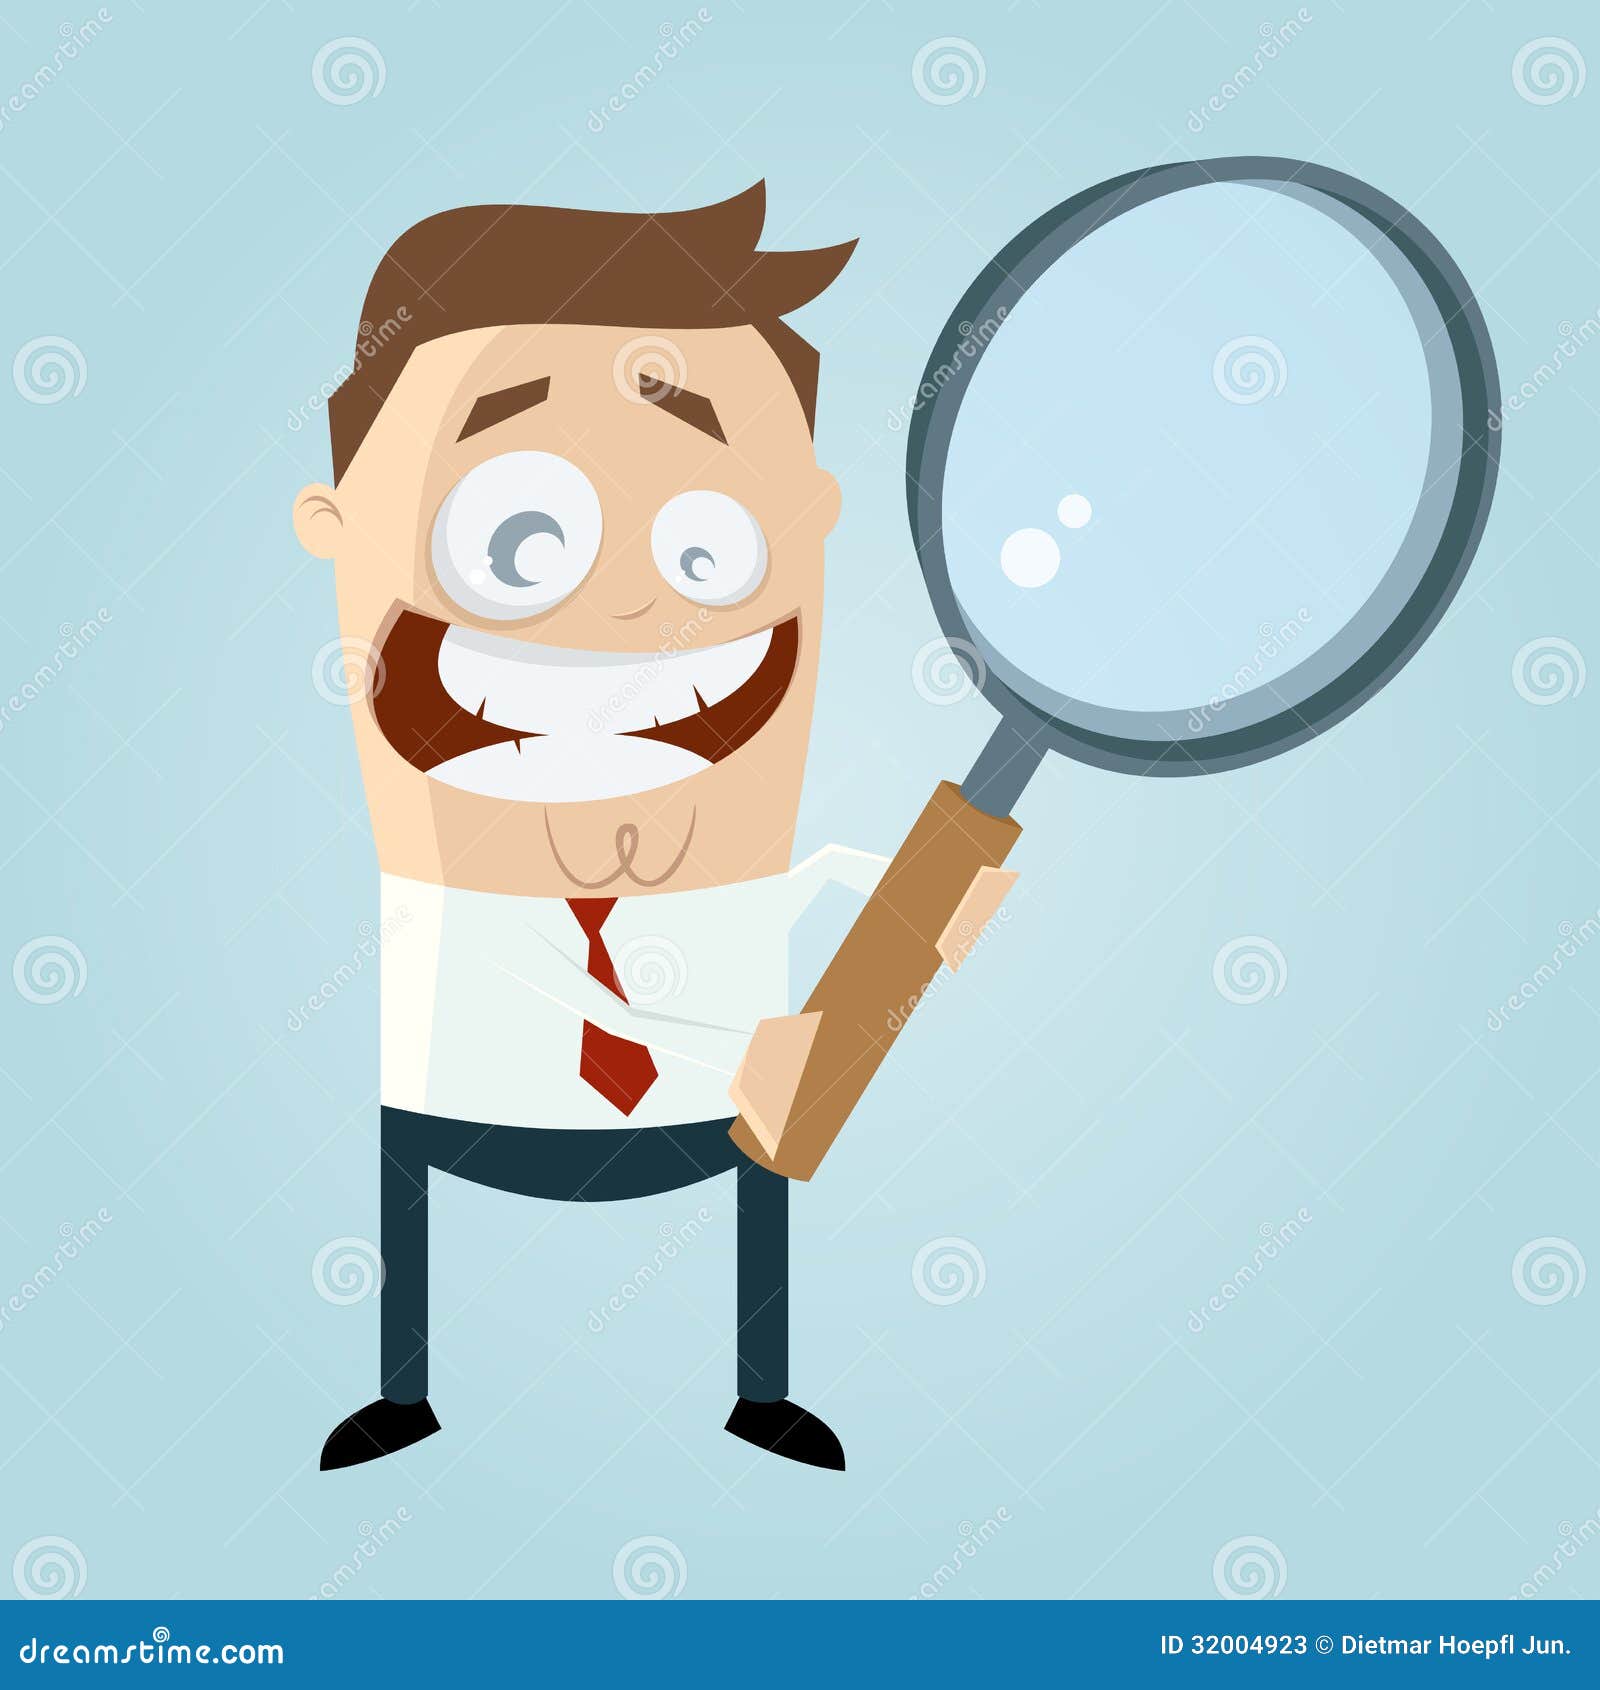 Funny Cartoon Man Is Searching Stock Photos - Image: 32004923